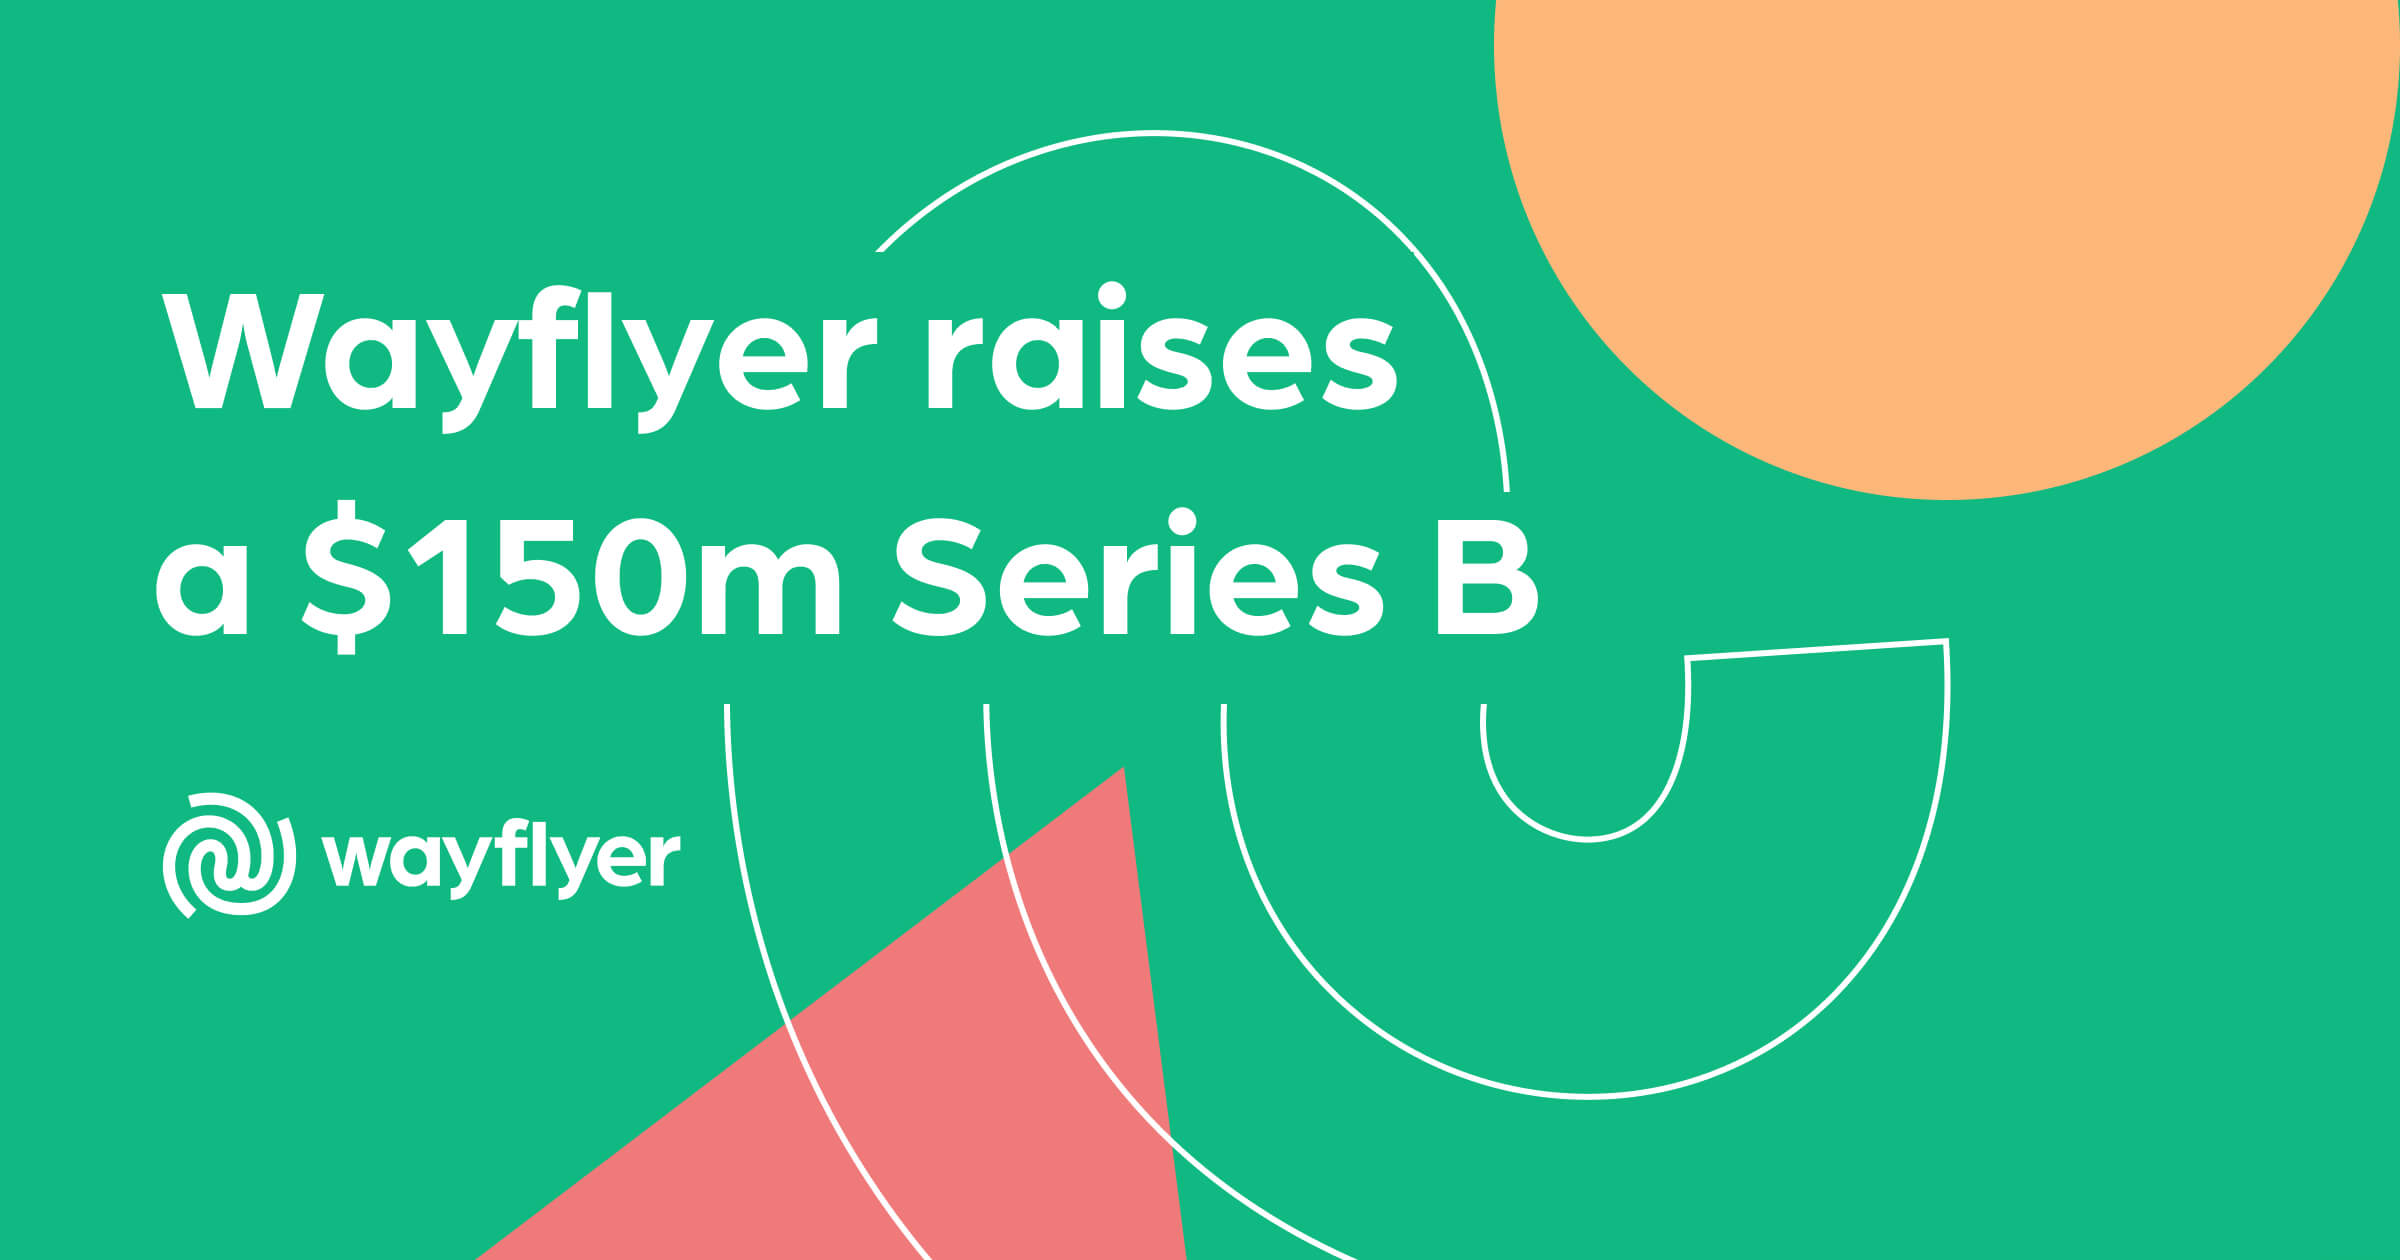 Announcing Wayflyer’s Series B: $150m to help eCommerce businesses accelerate growth 